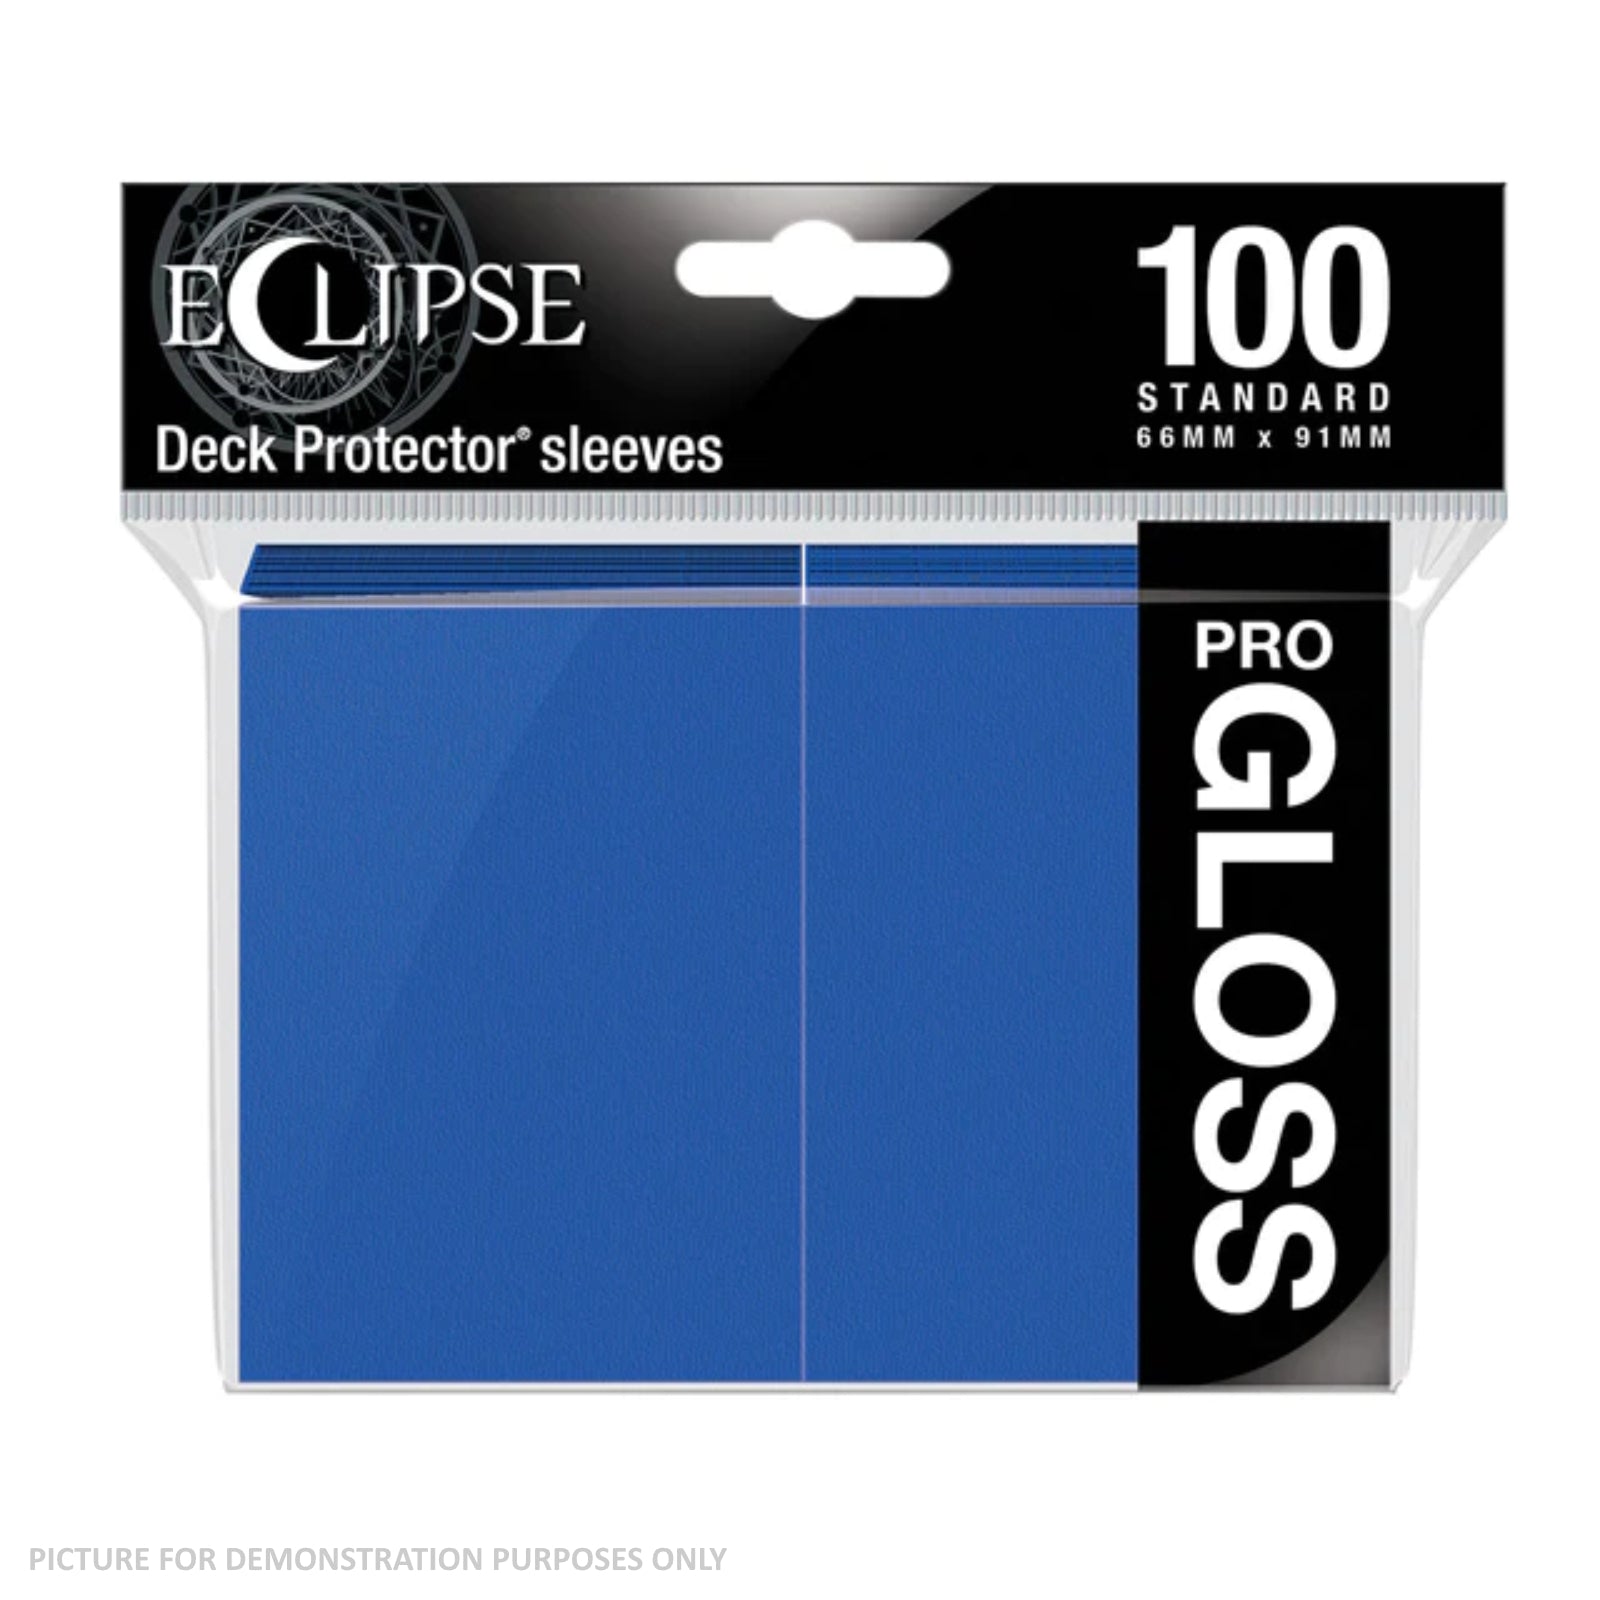 Ultra Pro Eclipse Gloss Standard Deck Protector Sleeves 100ct - Blue